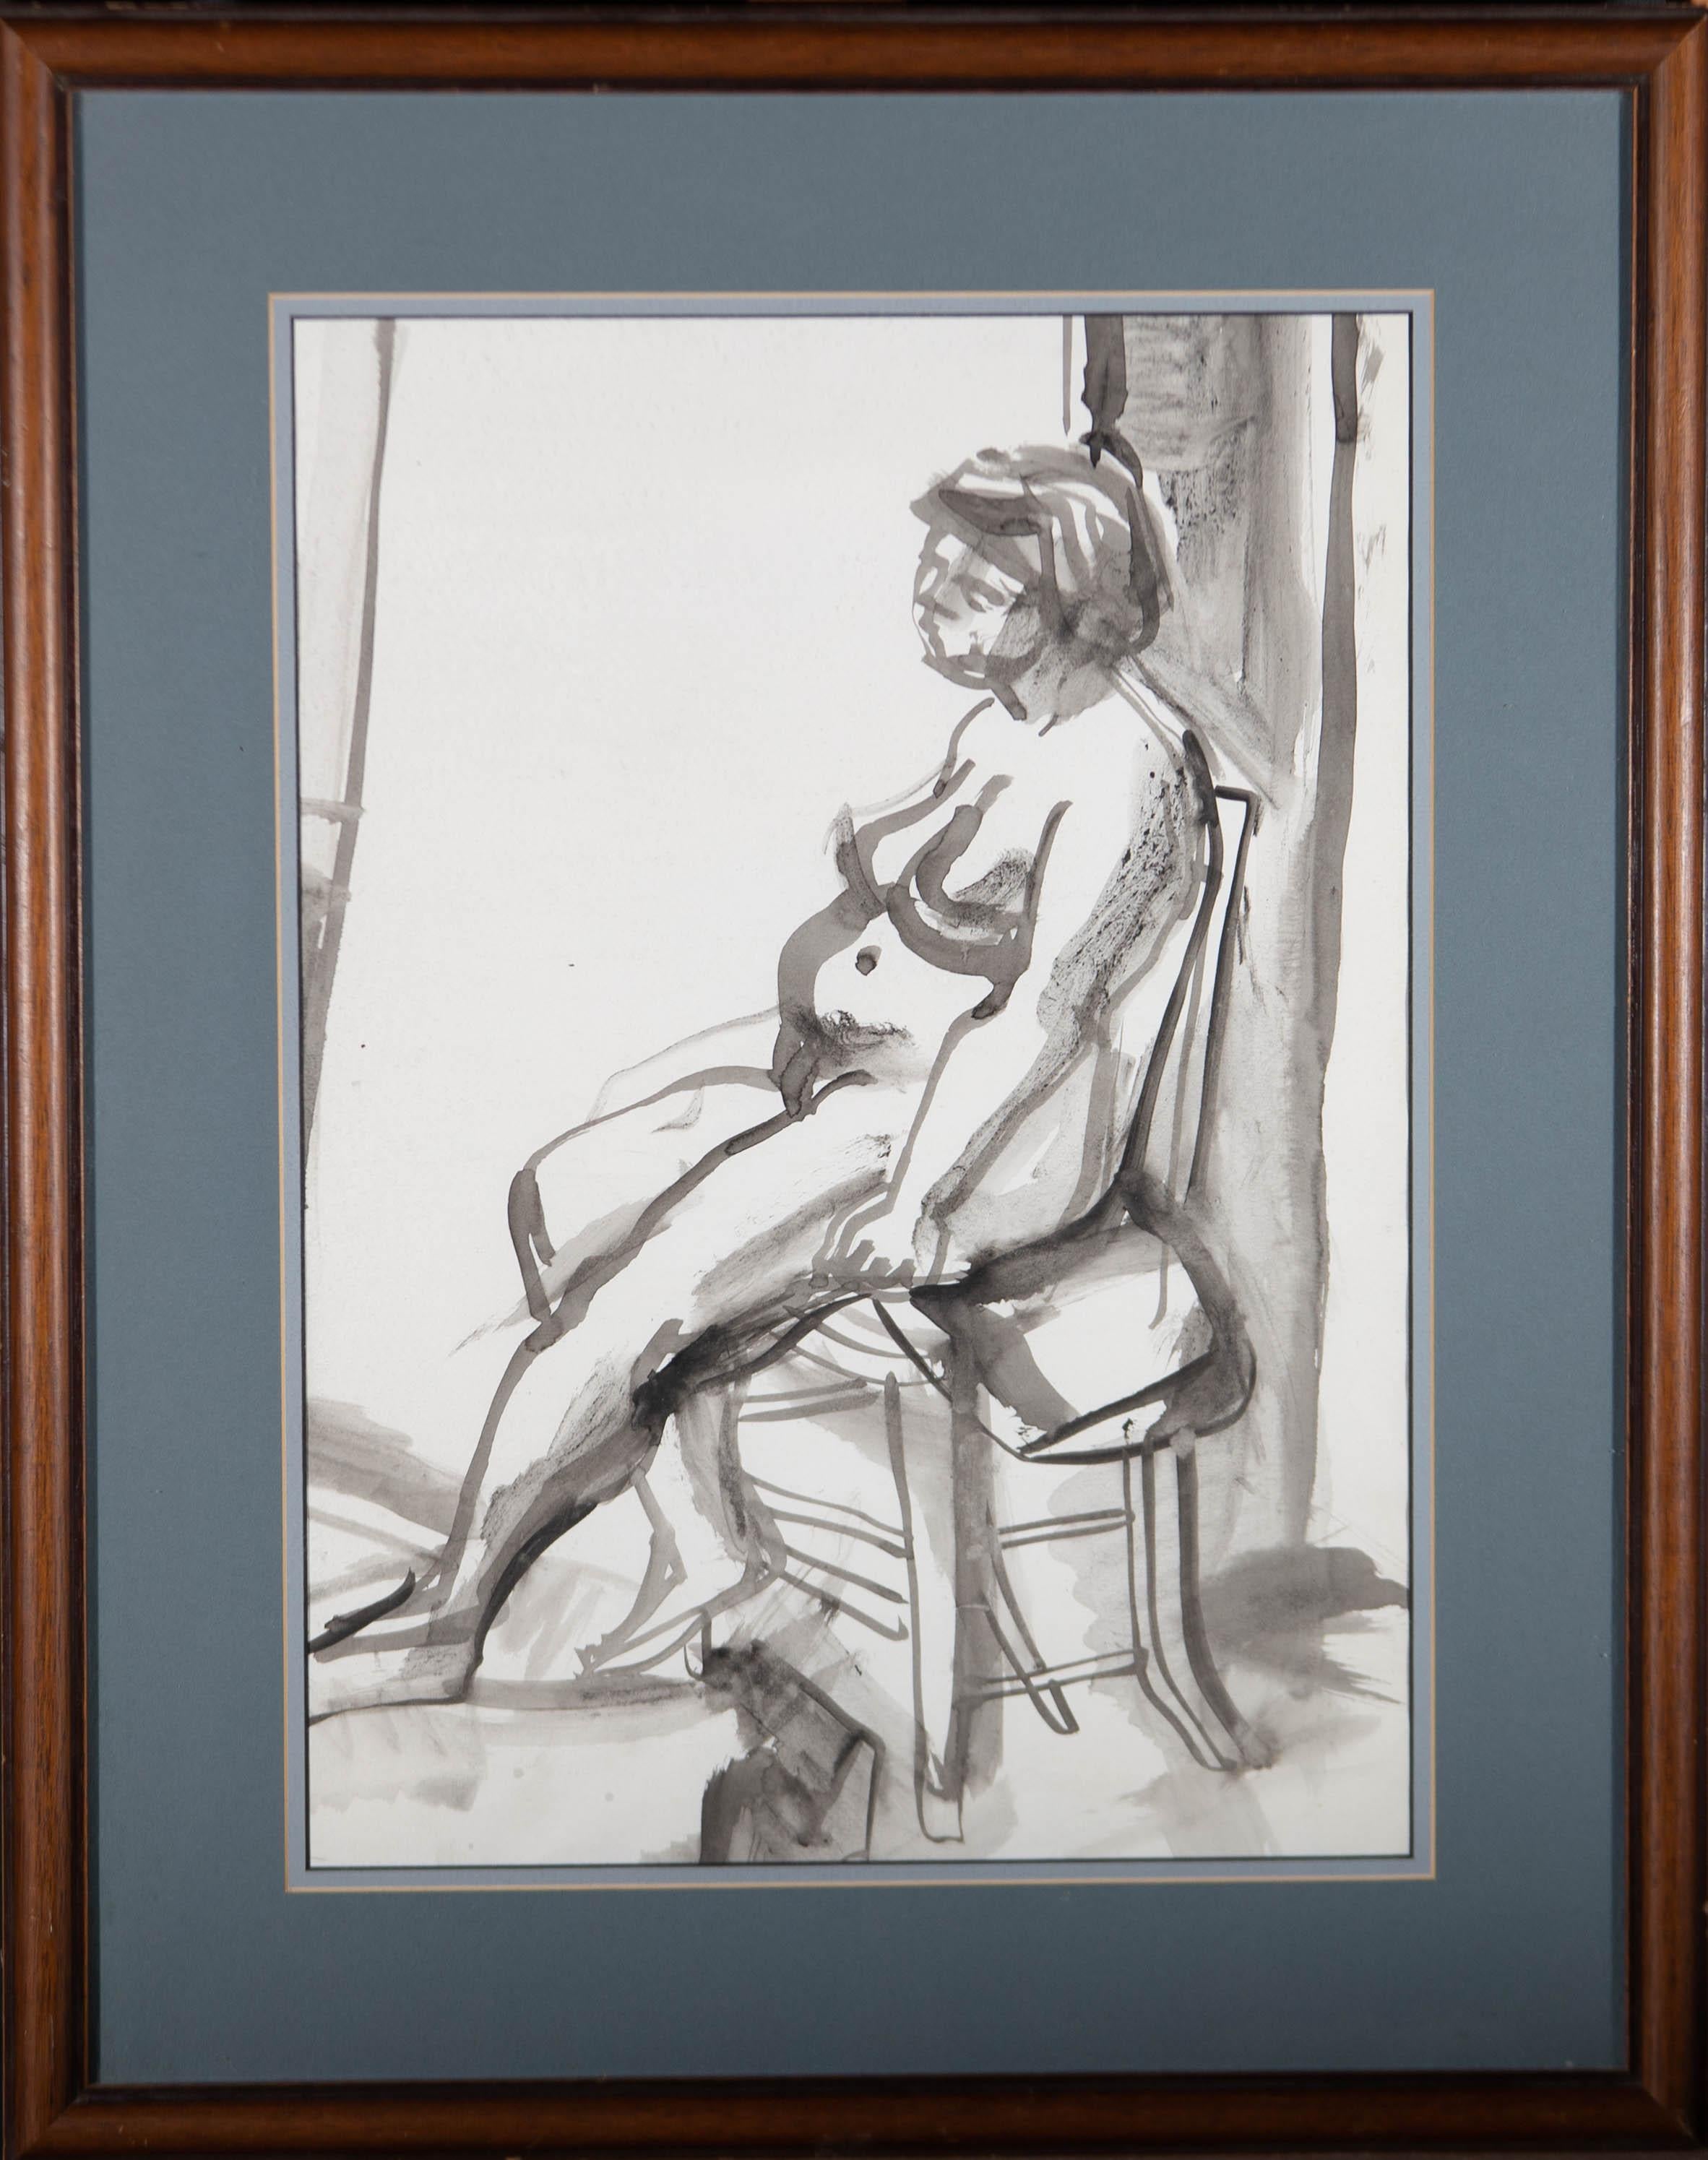 Unknown Portrait - 20th Century Ink Wash Drawing - Seated Nude Figure